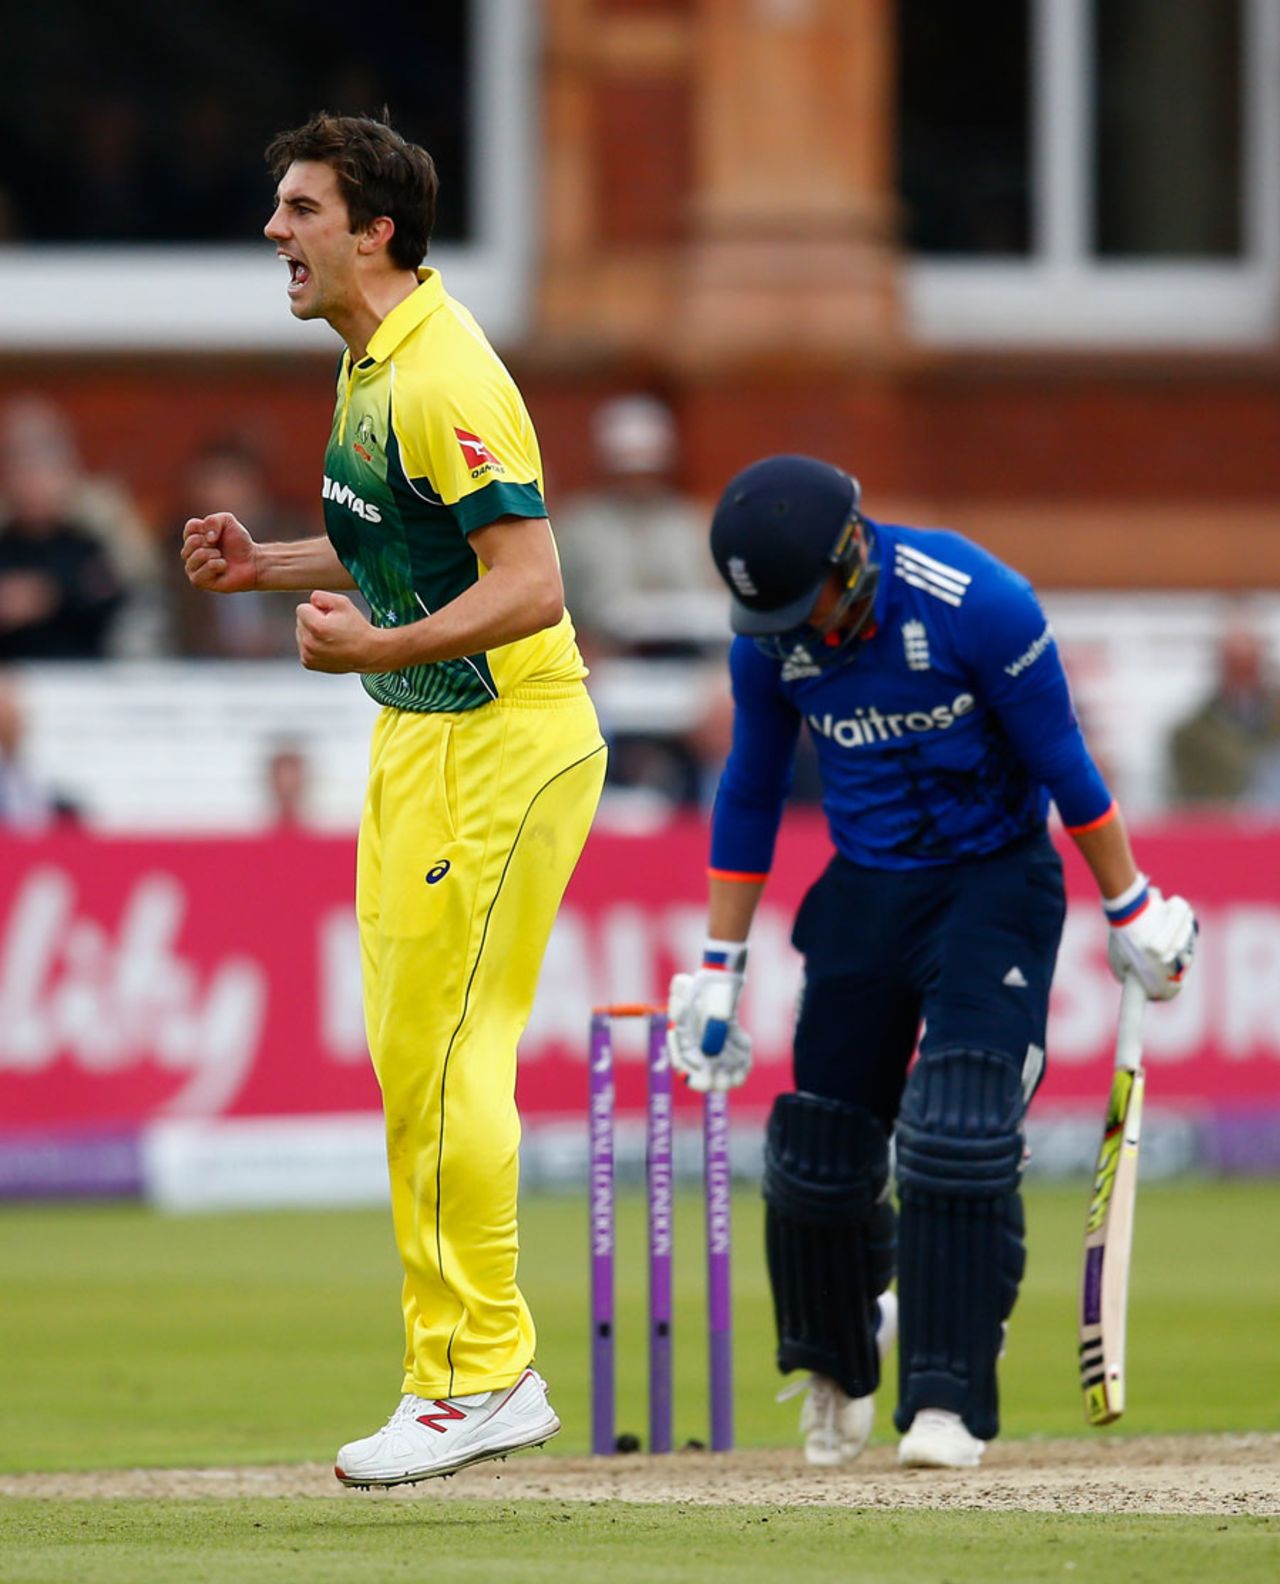 Pat Cummins exults after taking the wicket of Jason Roy, England v Australia, 2nd ODI, Lord's, September 5, 2015